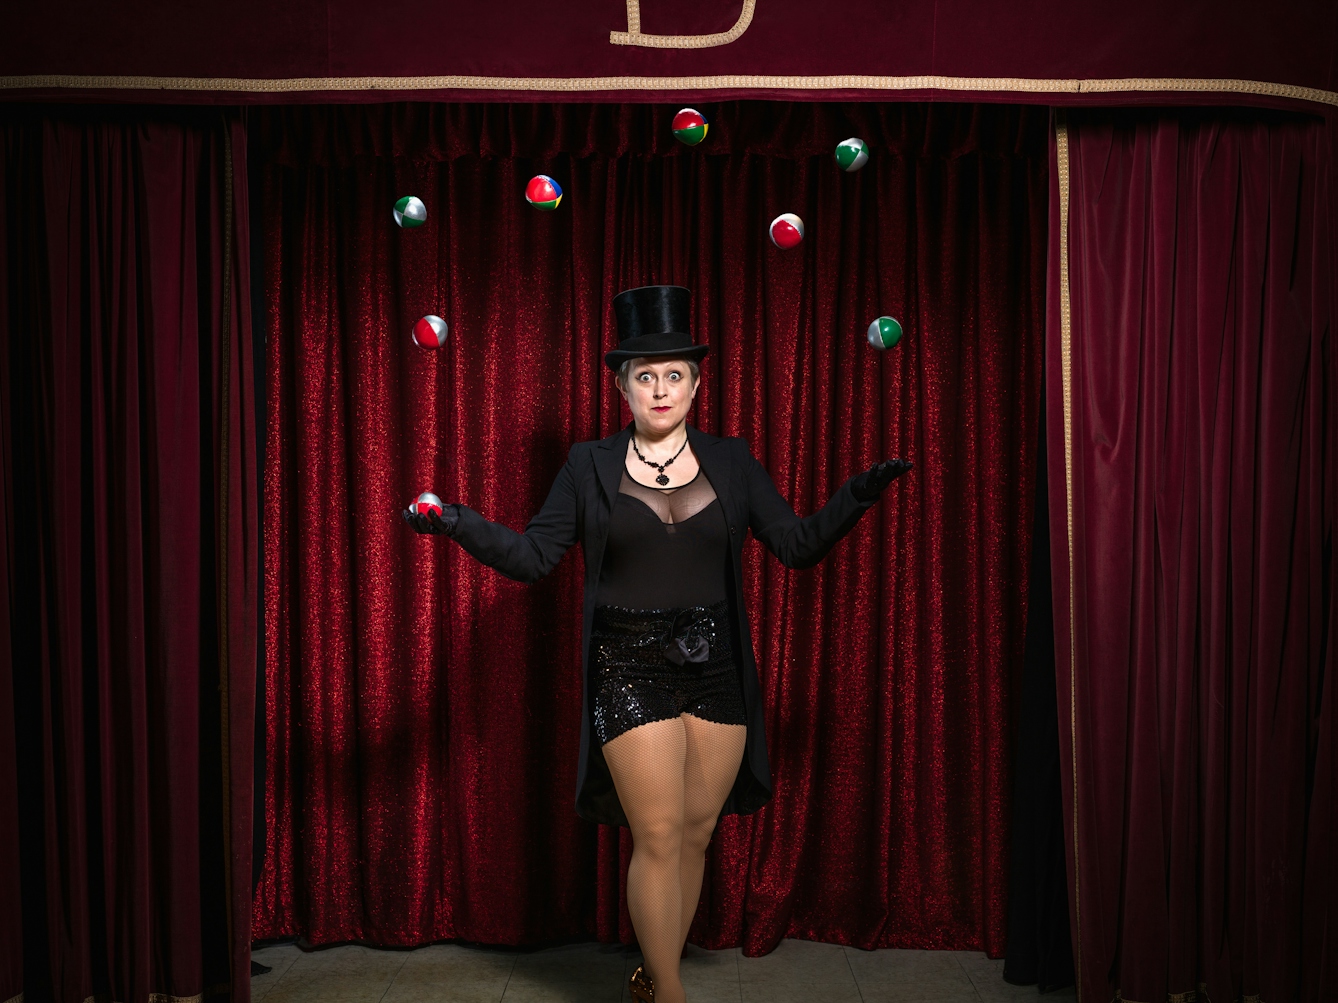 Photograph of a woman on a theatre stage surrounded by red curtains, dressed in a top hat and tails juggling 8 balls in the air.